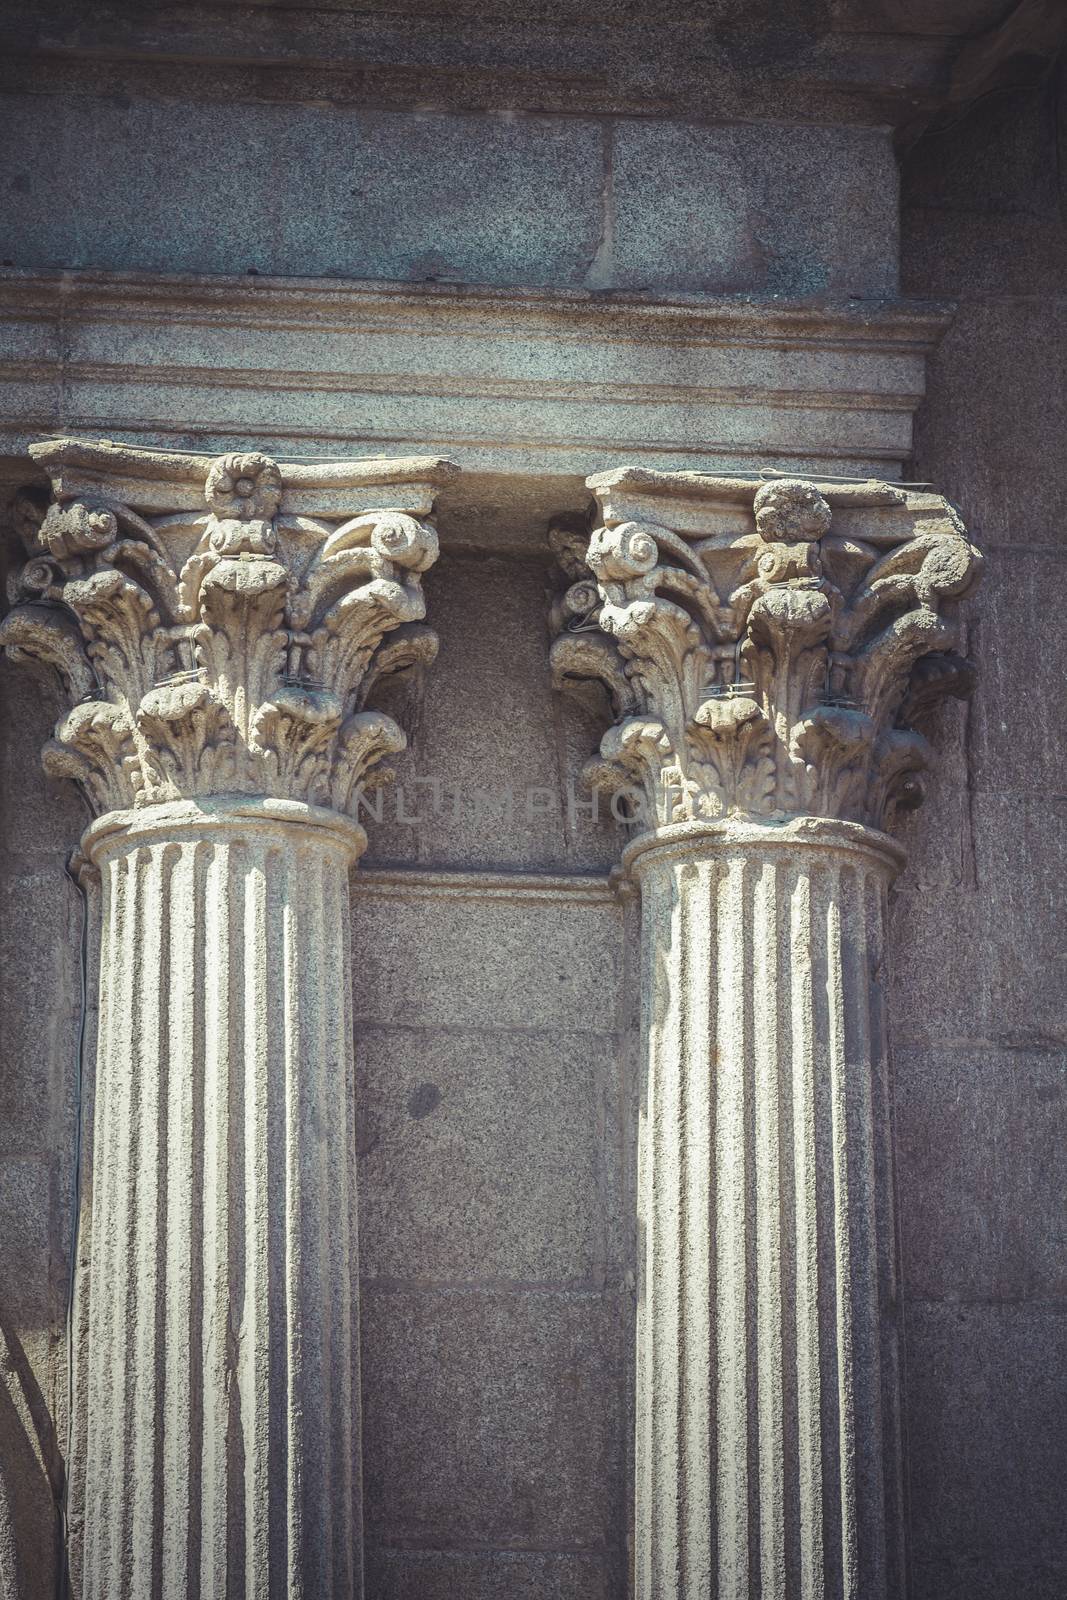 Temple, Corinthian capitals, stone columns in old building in Sp by FernandoCortes